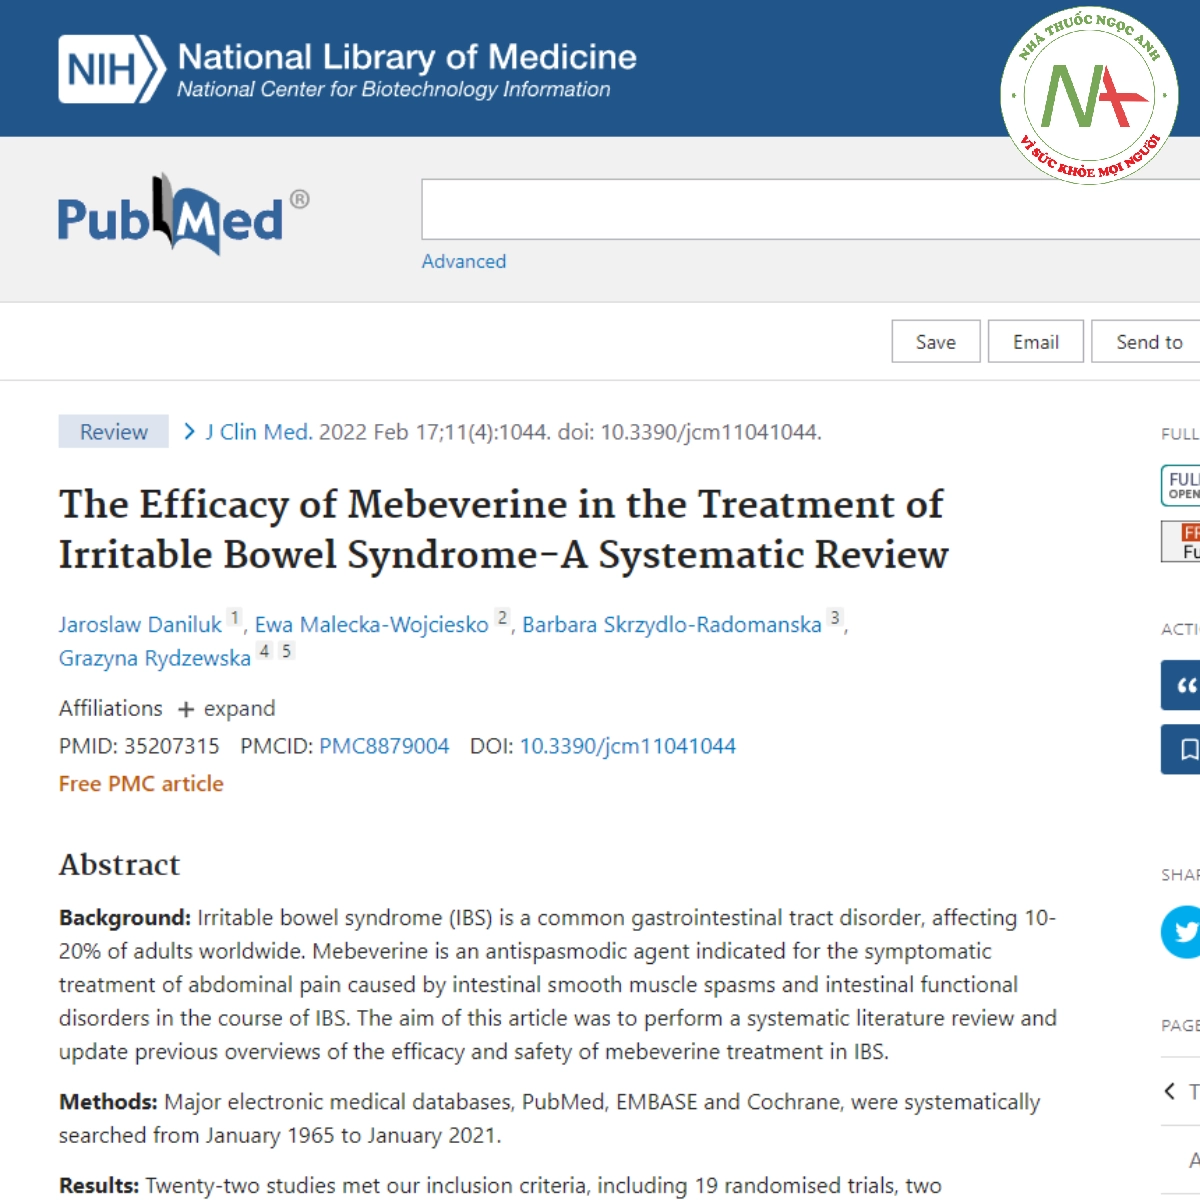 The Efficacy of Mebeverine in the Treatment of Irritable Bowel Syndrome-A Systematic Review